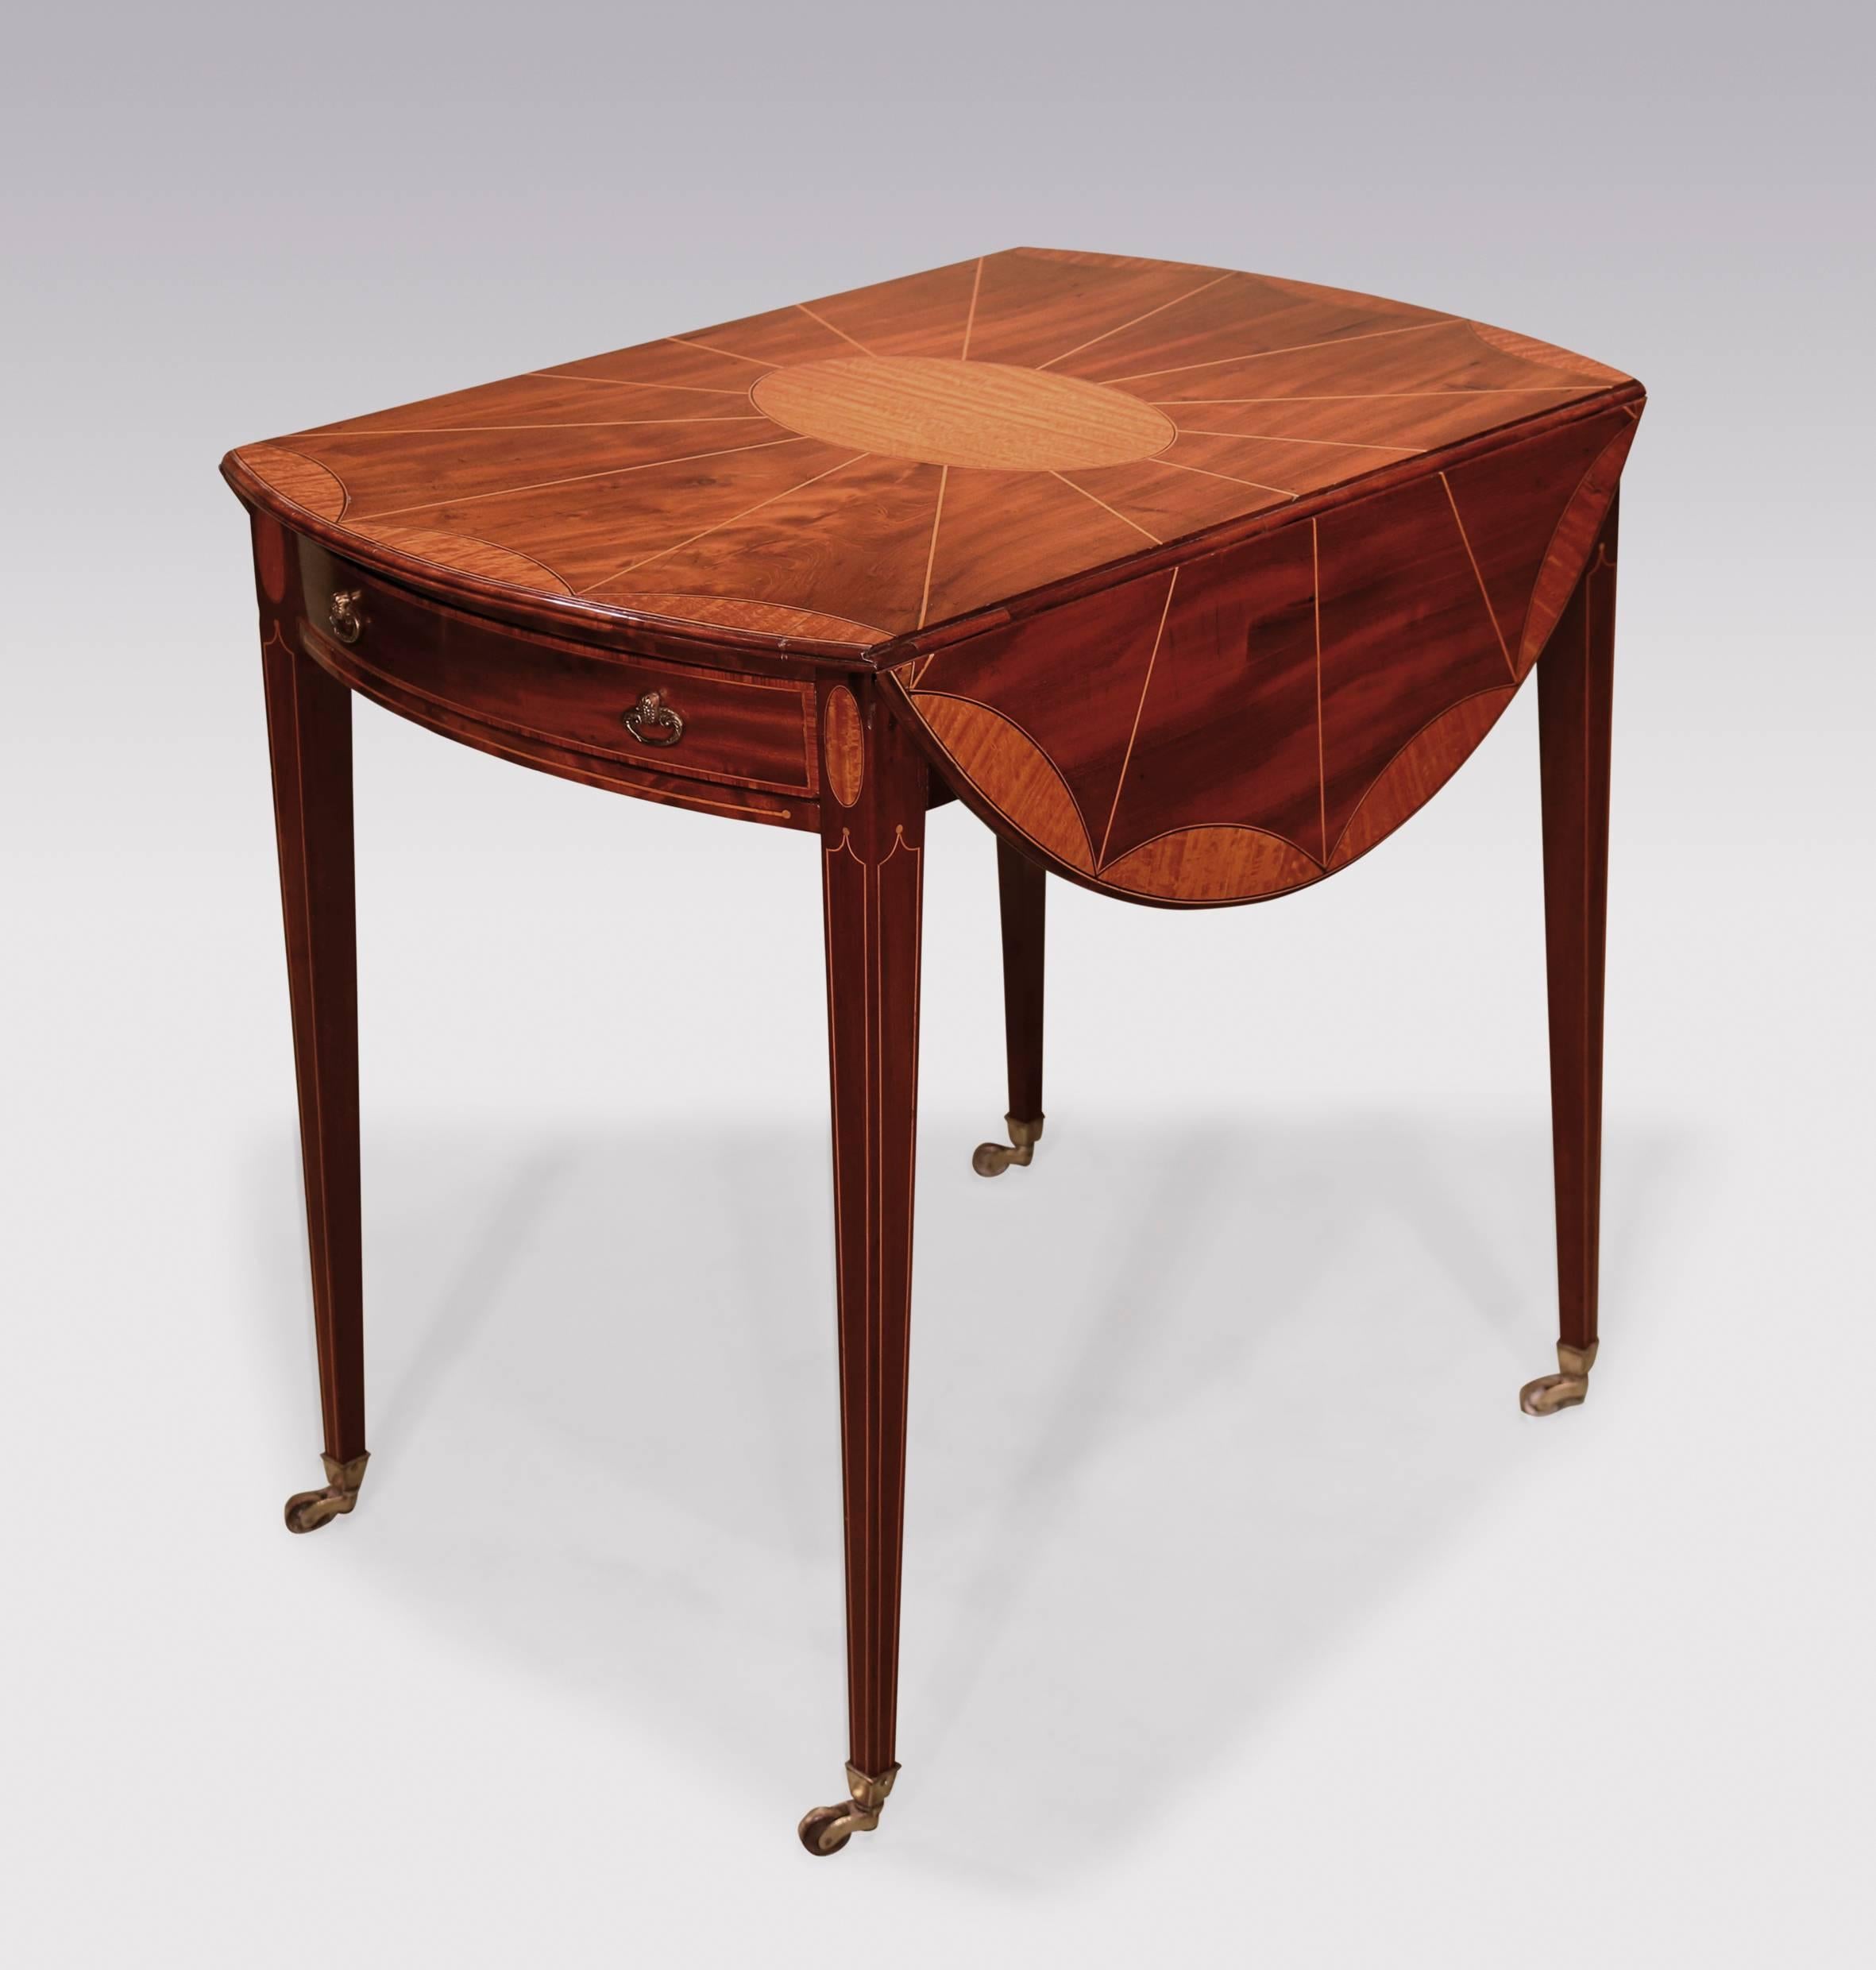 An attractive late 18th century Sheraton period well-figured mahogany Pembroke table, having boxwood line “segmented” oval top with satinwood central oval panel and satinwood scalloped edges, above tulipwood crossbanded frieze drawer, supported on